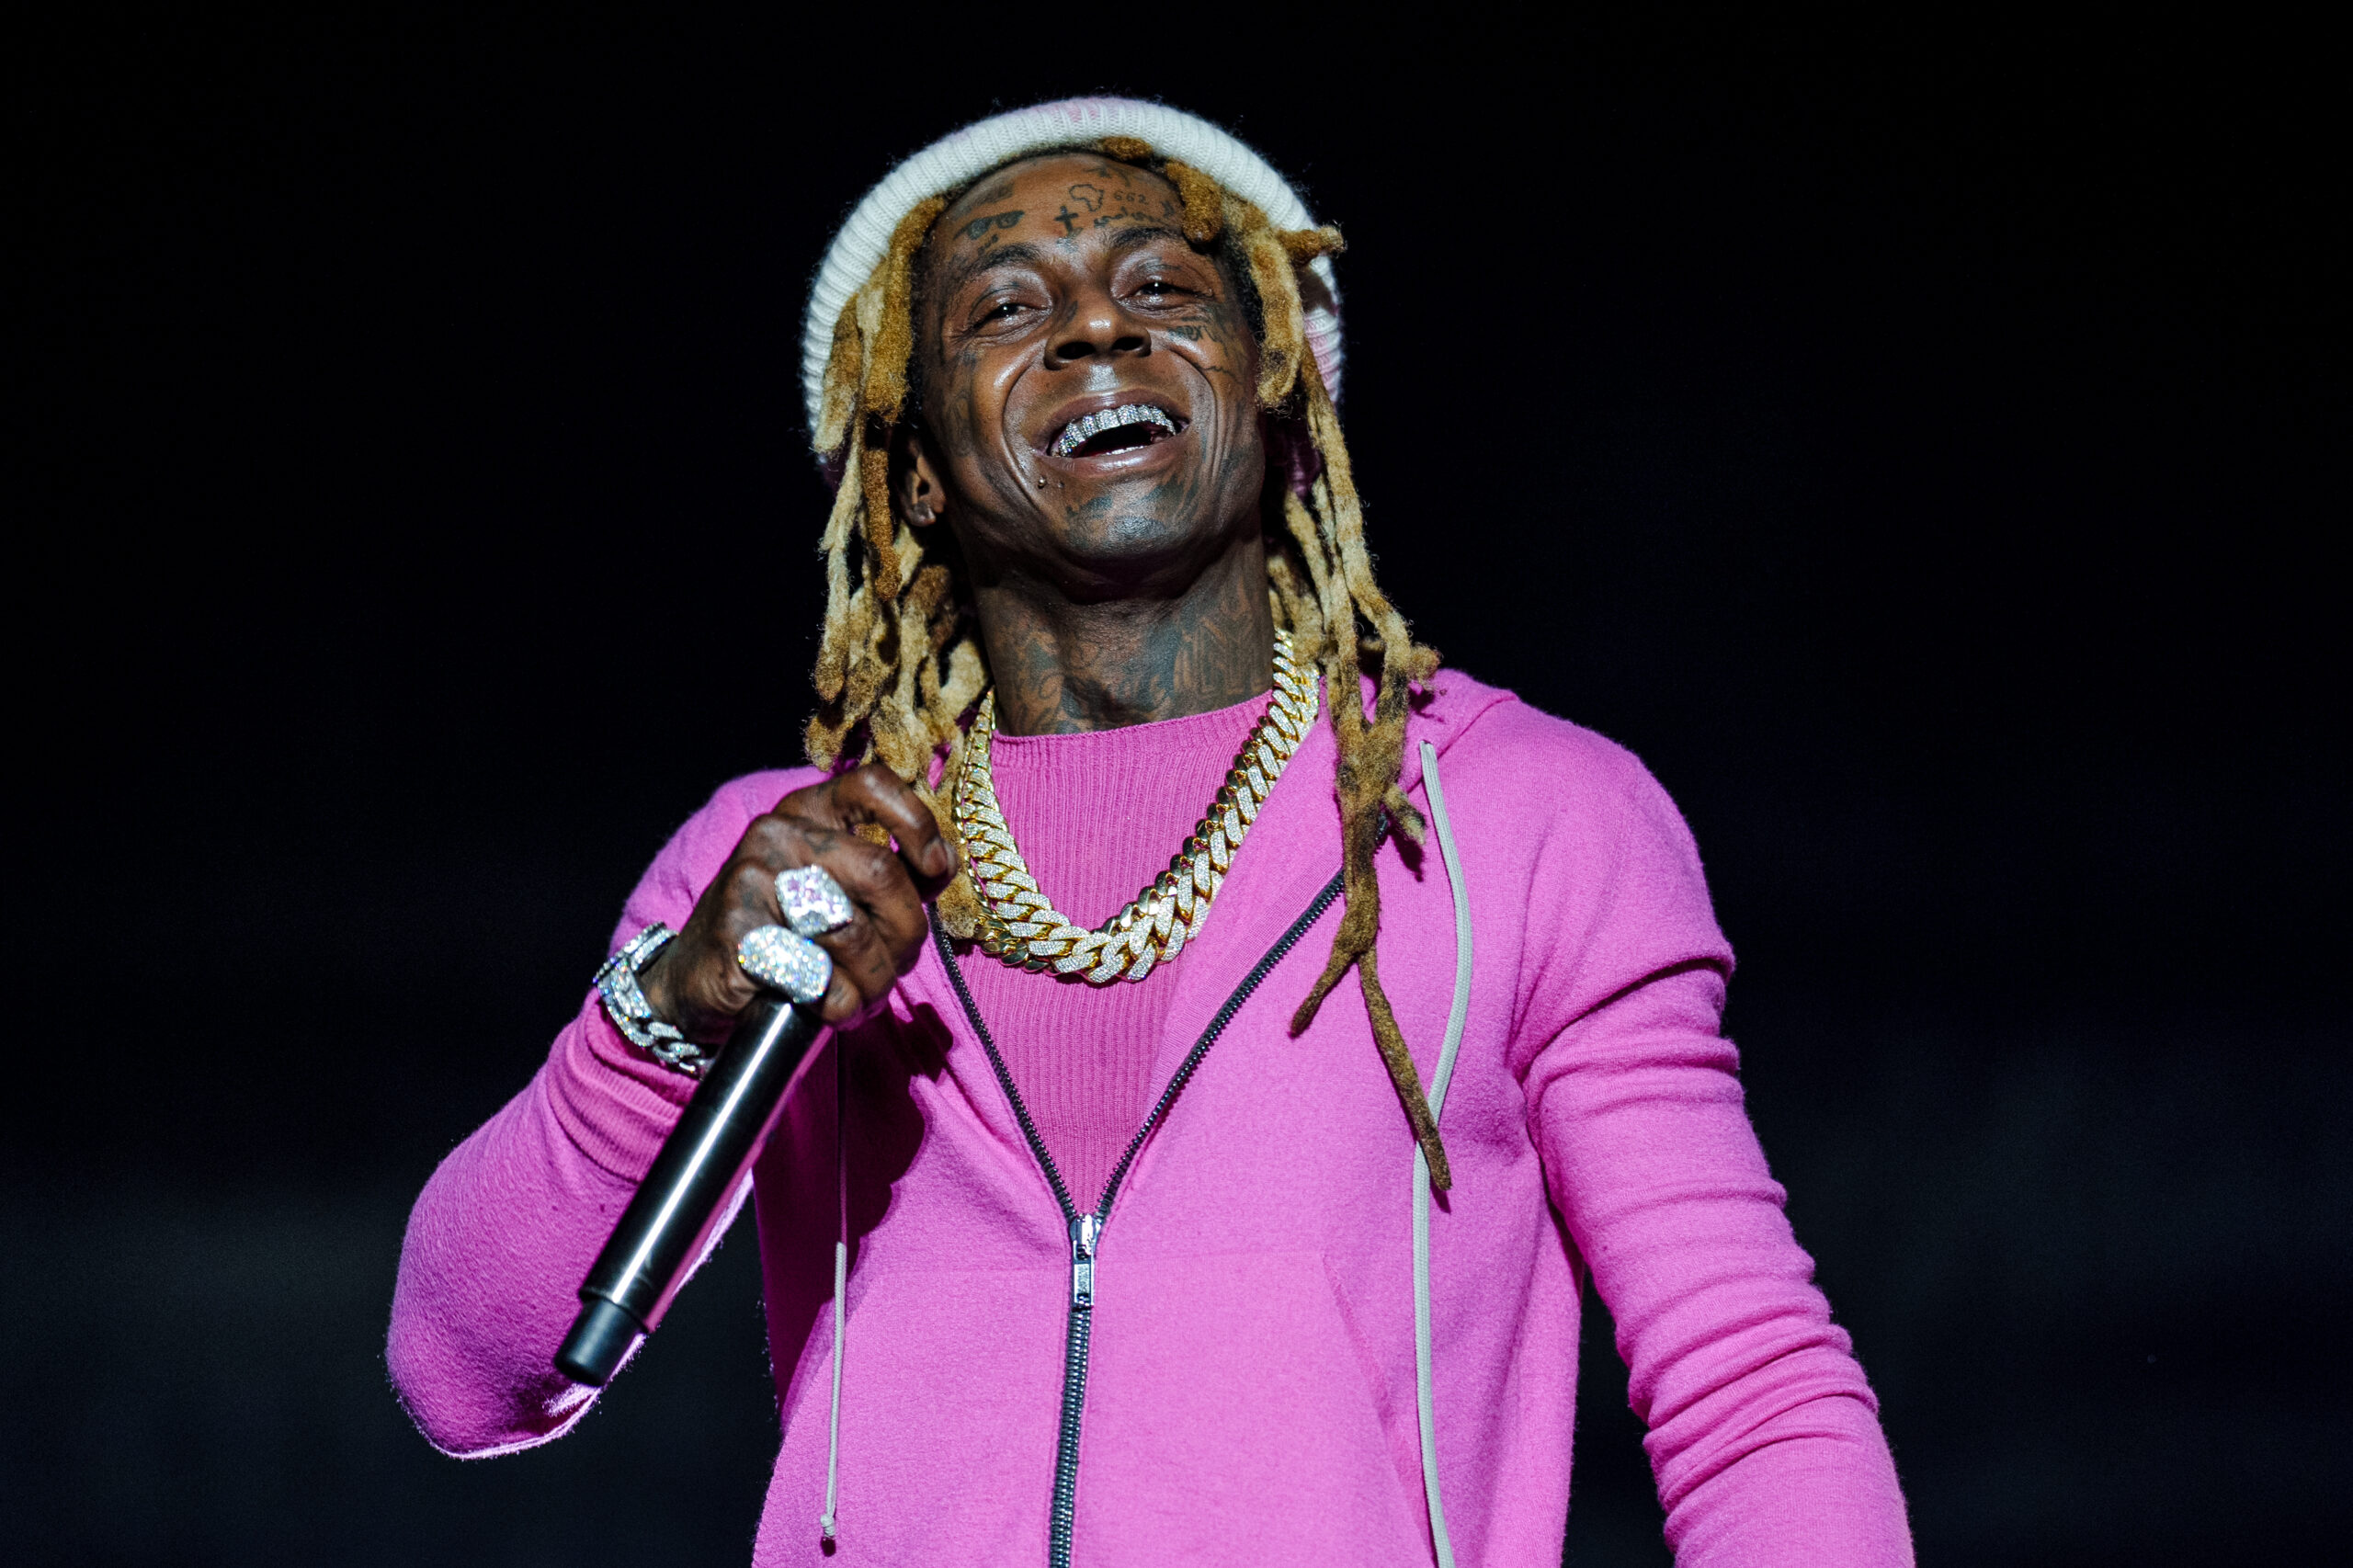 Lil Waynes Essence Festival Dance Moves Will Leave You Smiling Watch